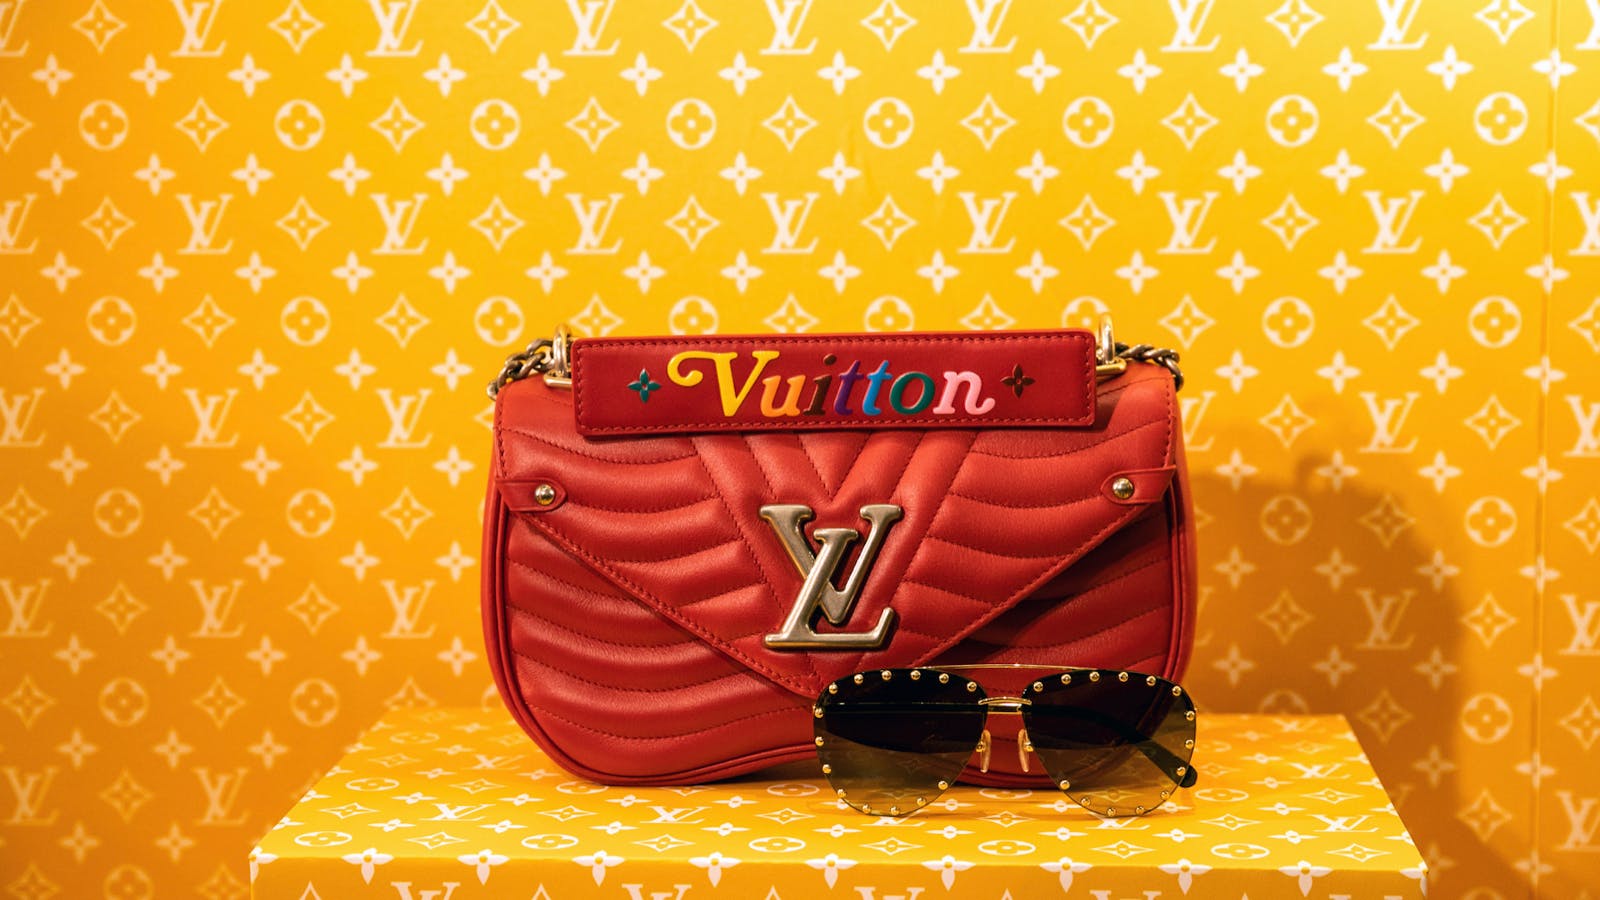 A Louis Vuitton handbag and sunglasses. Photo by Bloomberg
